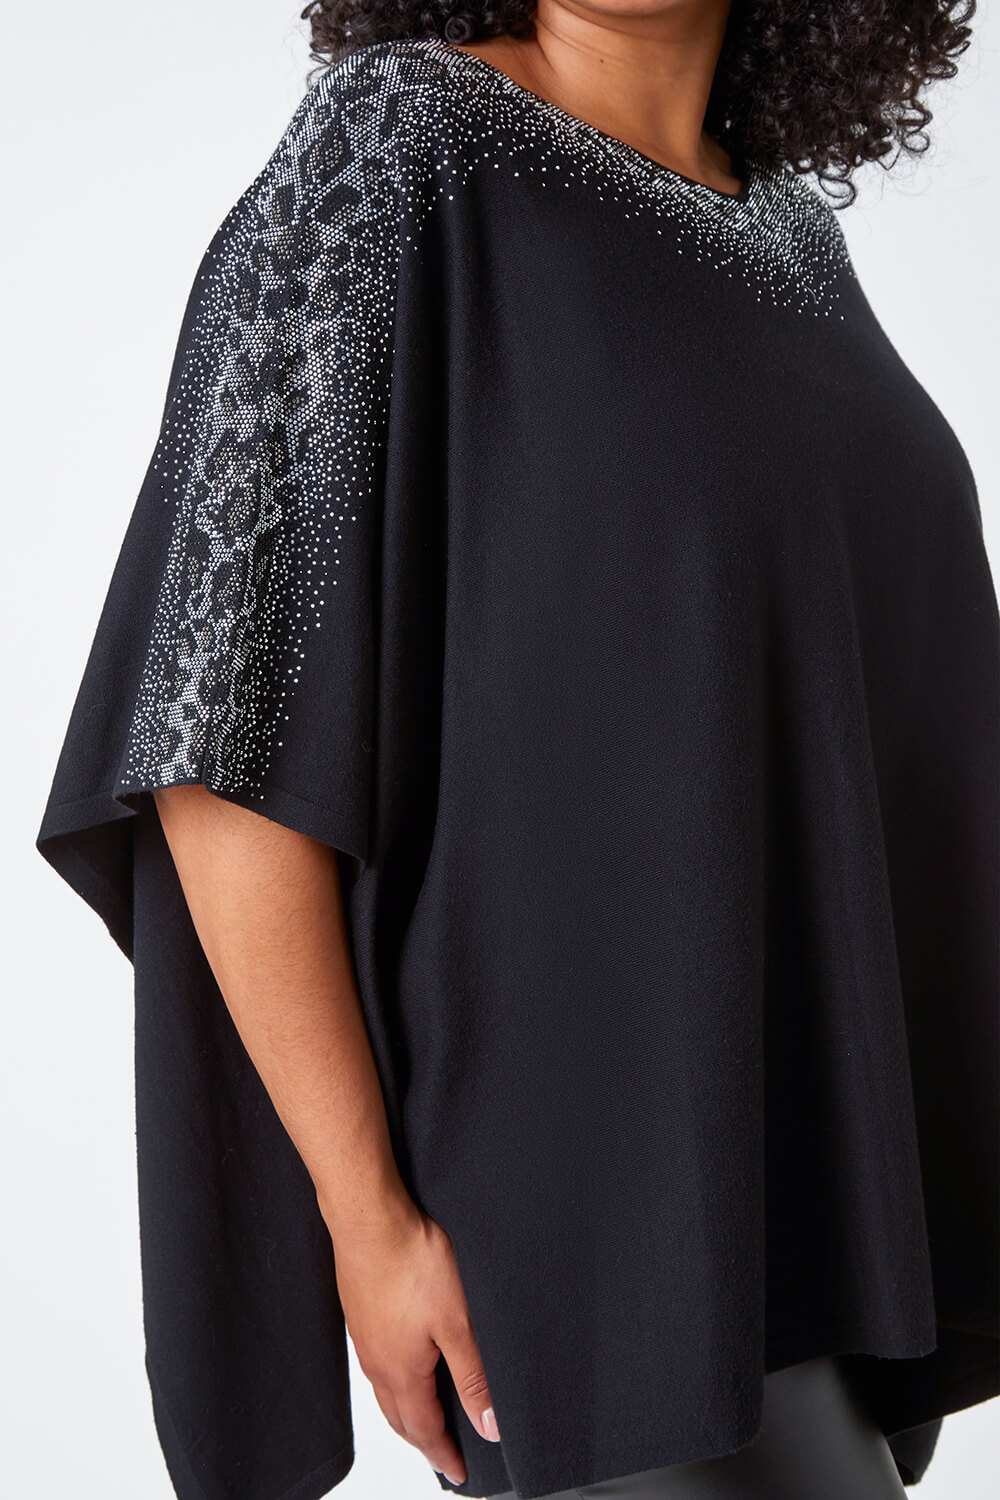 Black Curve One Size Sparkle Poncho, Image 5 of 5